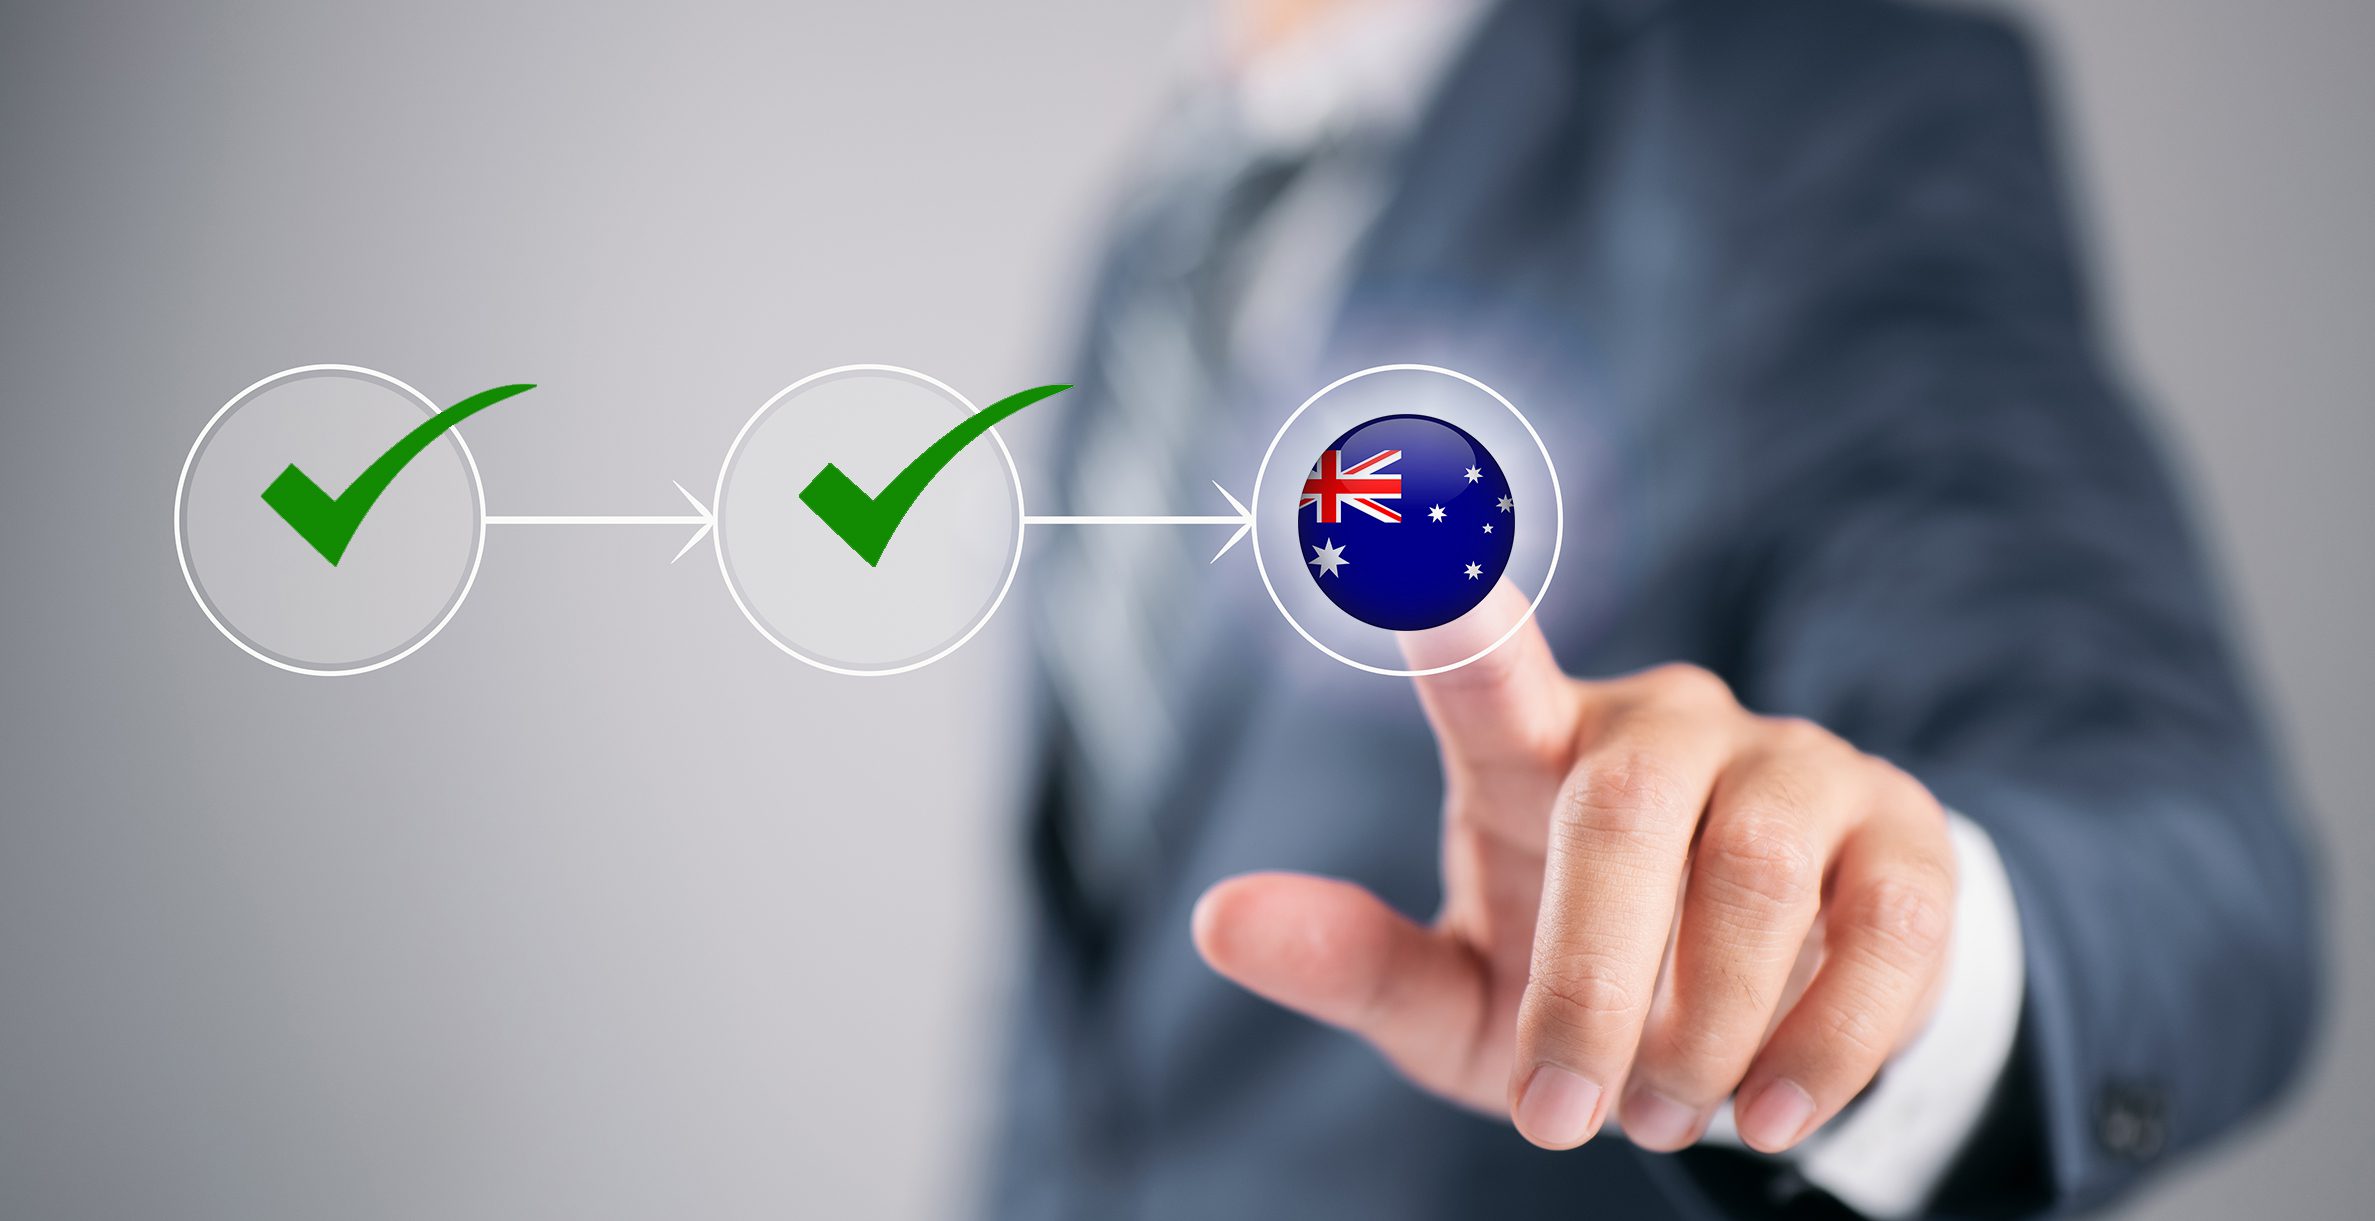 With Australia subclass 188 visa get Fast track processing